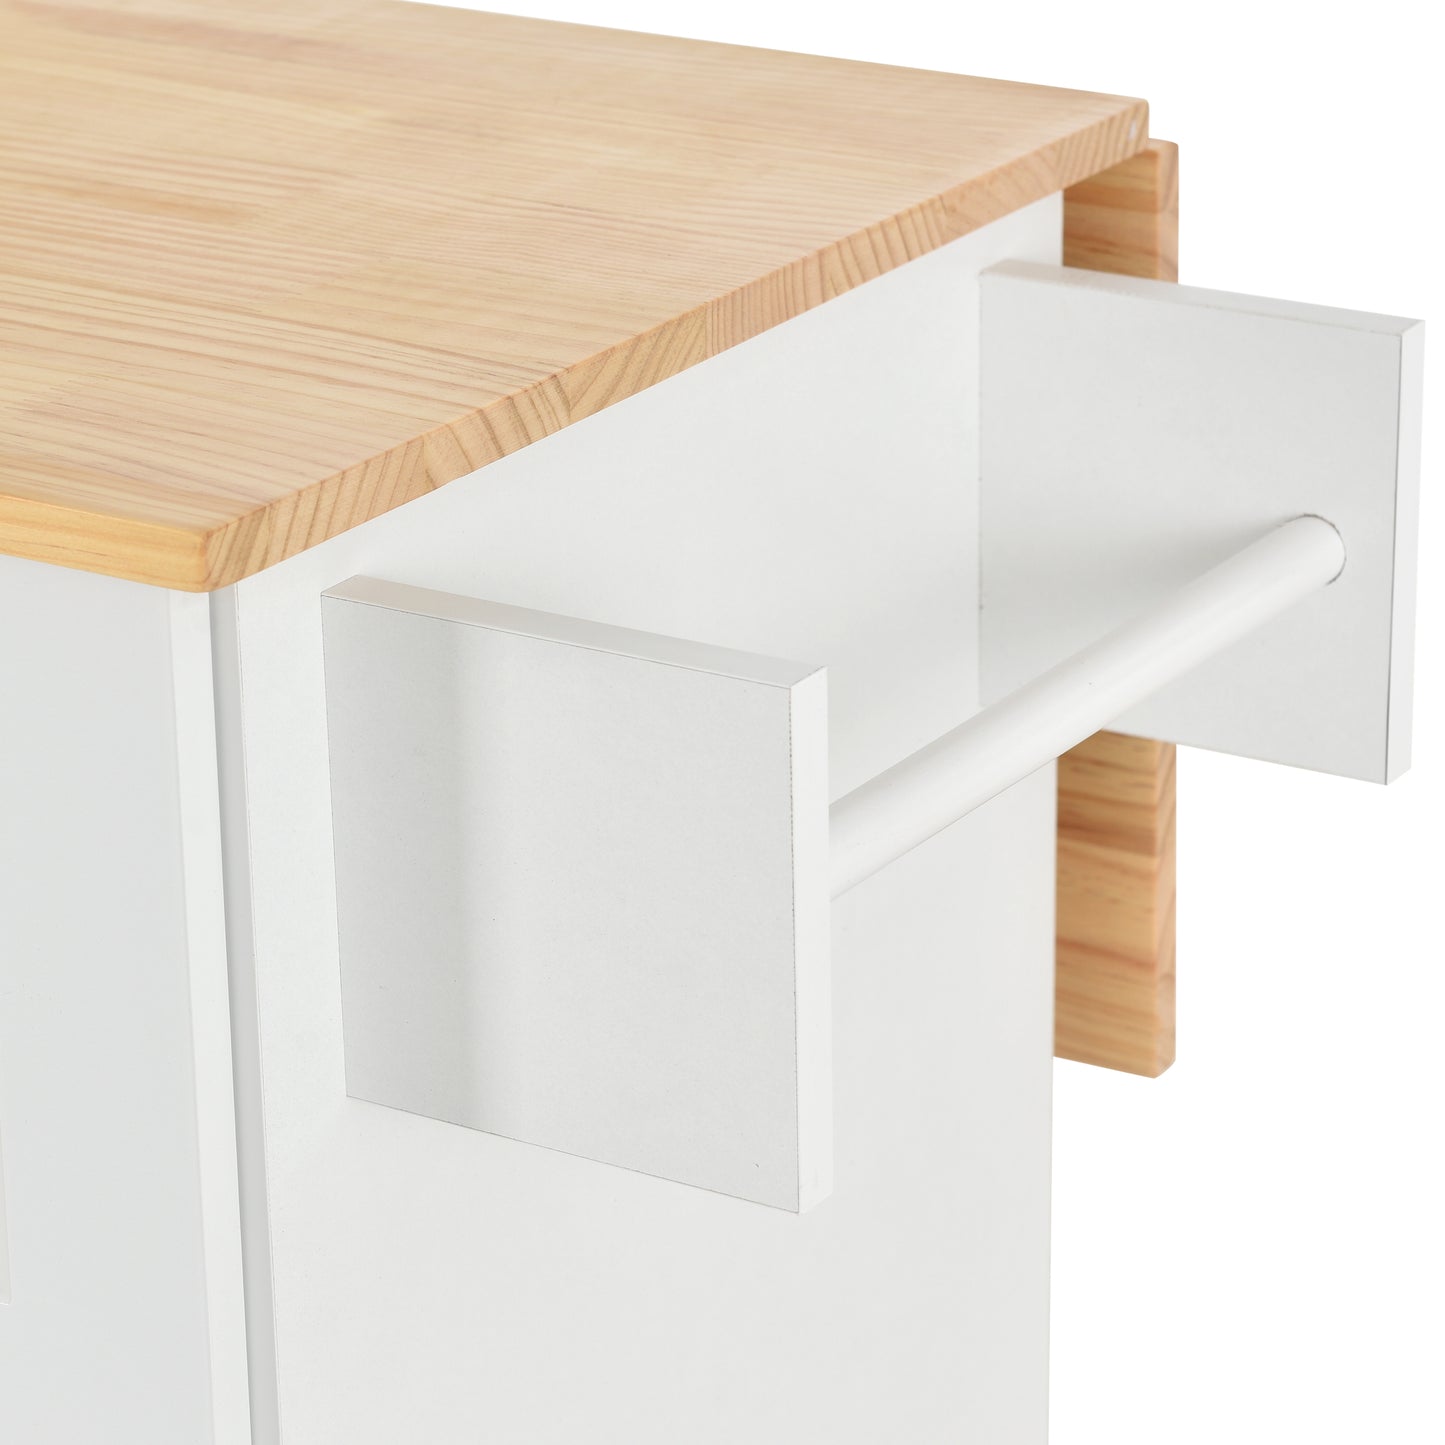 Rolling Mobile Kitchen Island（White）